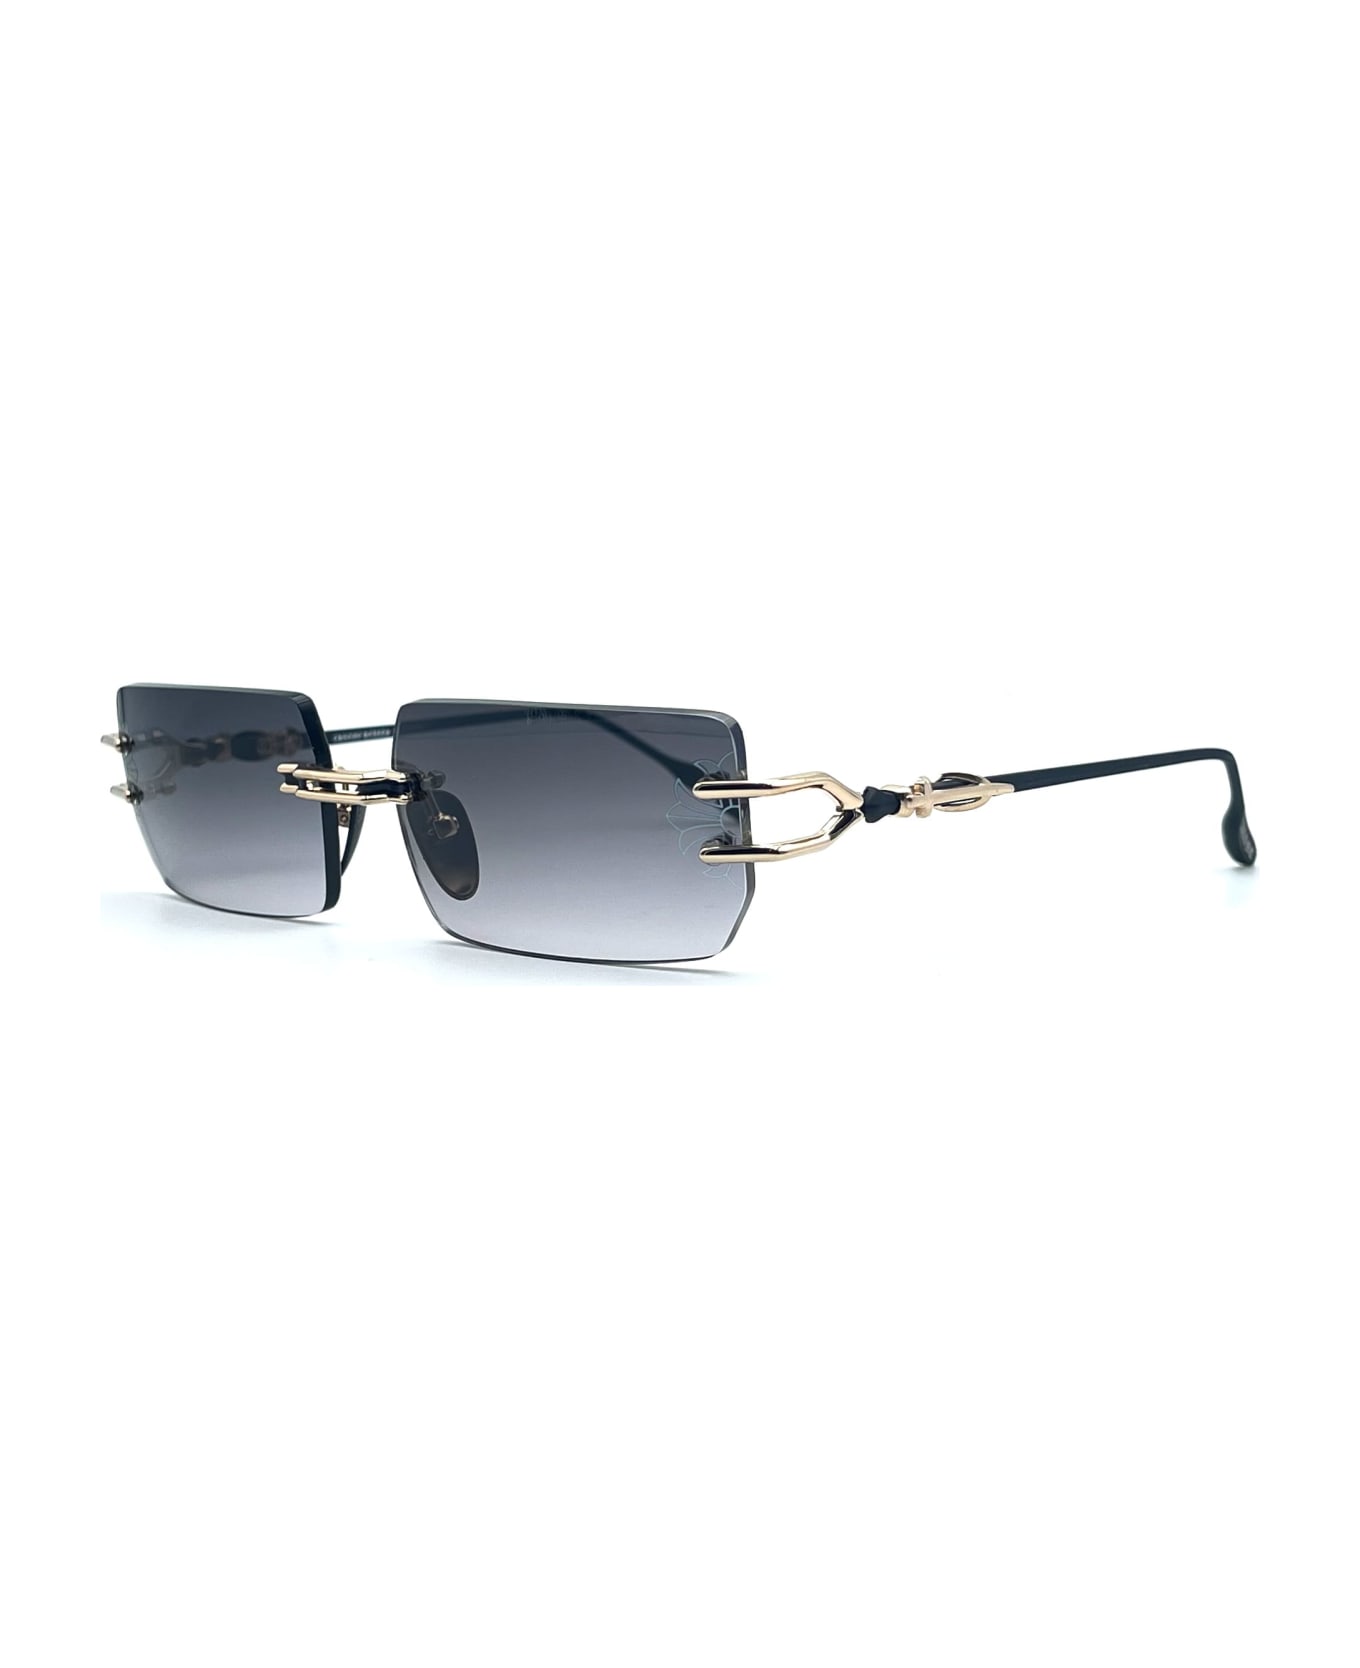 Chrome Hearts Lordie - Gold Plated / Matte Black Sunglasses - Black/gold